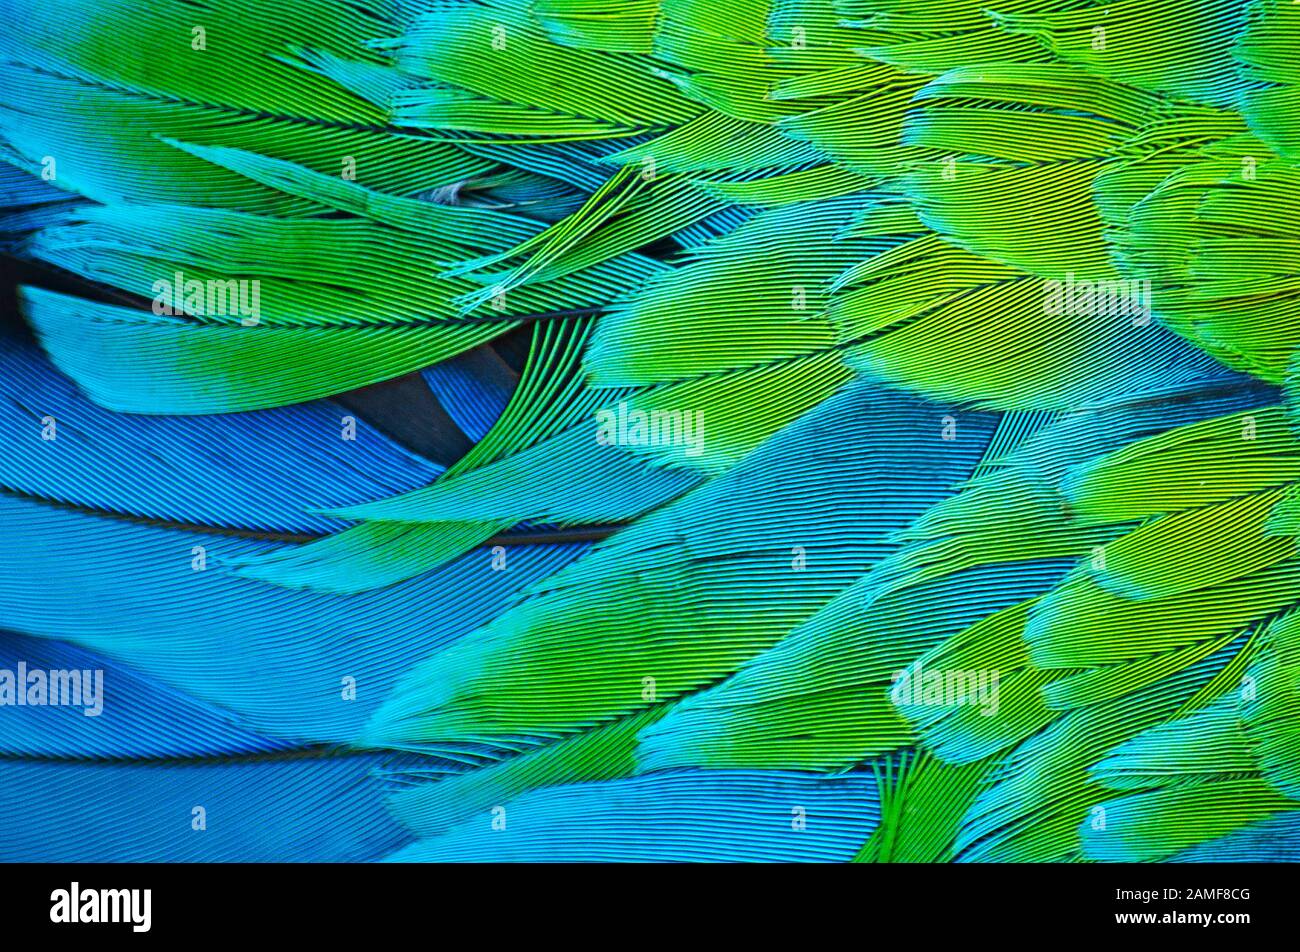 close up of feathers on wing of Great Green Macaw / Parrot Stock Photo